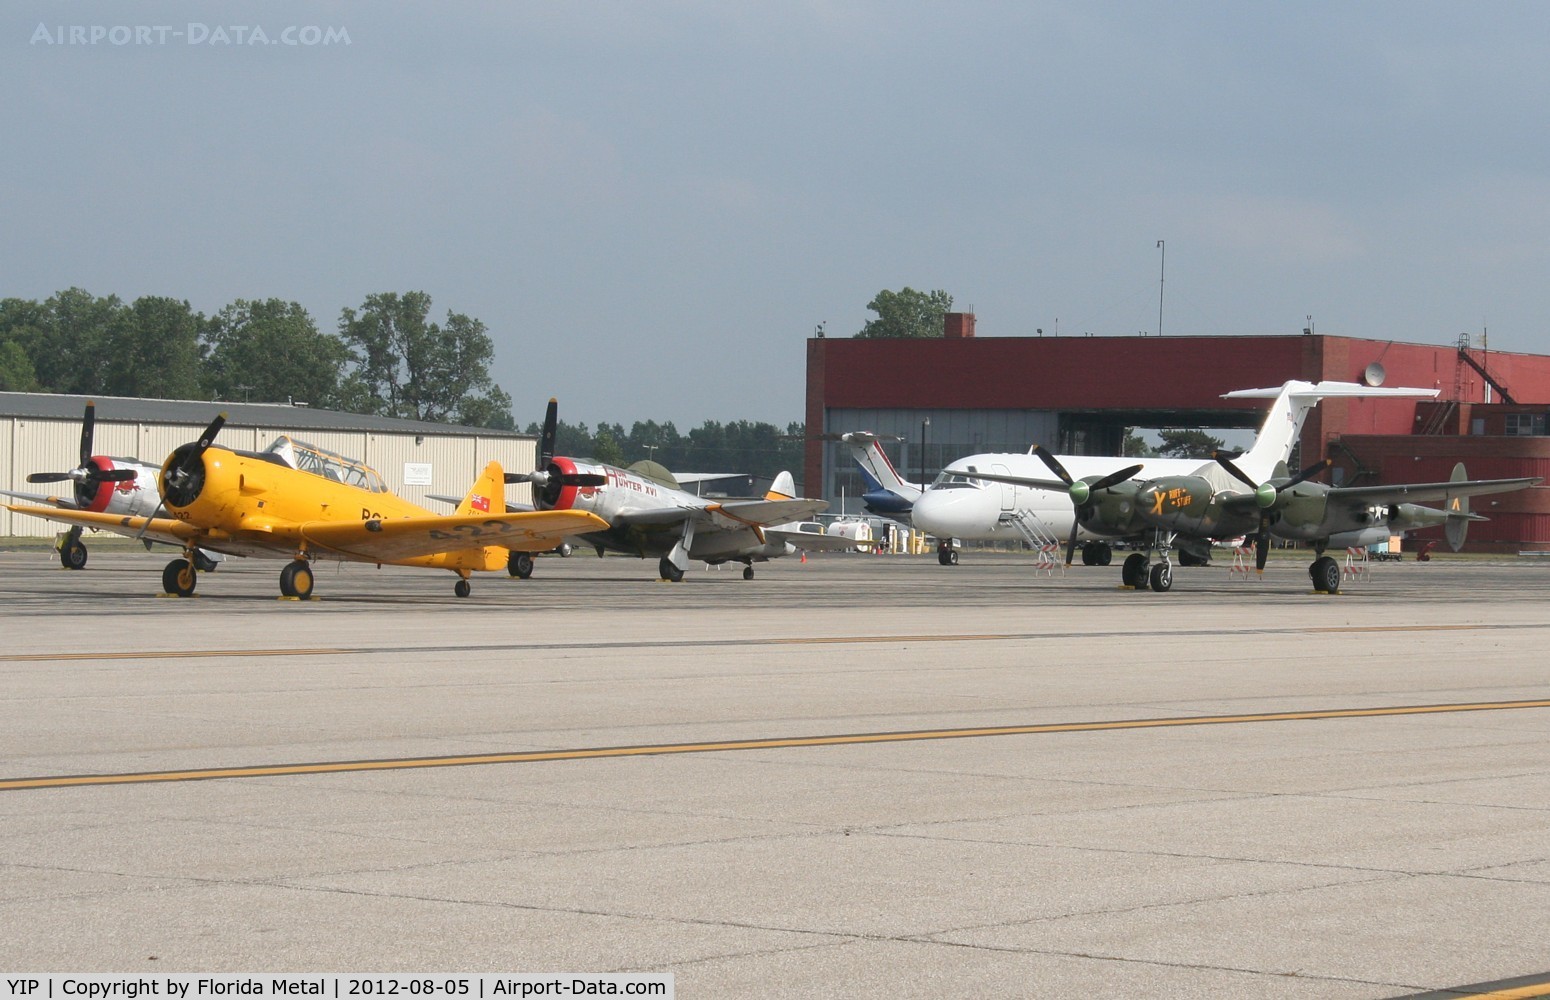 Willow Run Airport (YIP) - ramp overview P-38, T-6, 2 P-47s and a couple DC-9s at Thunder Over Michigan